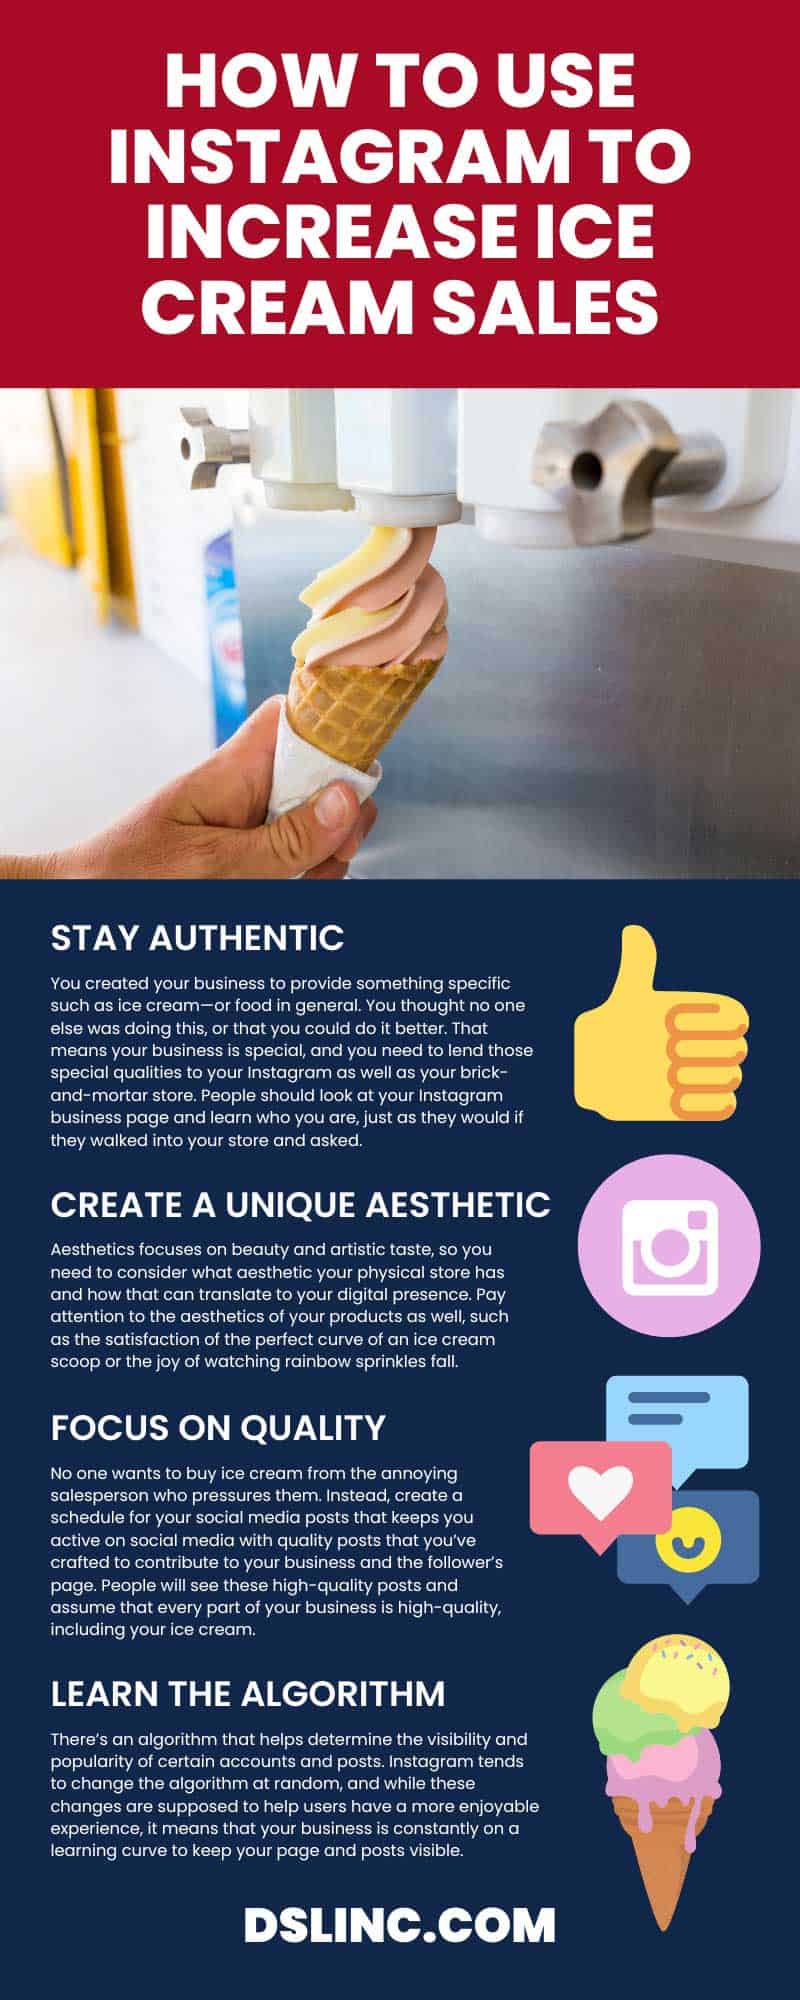 How To Use Instagram To Increase Ice Cream Sales